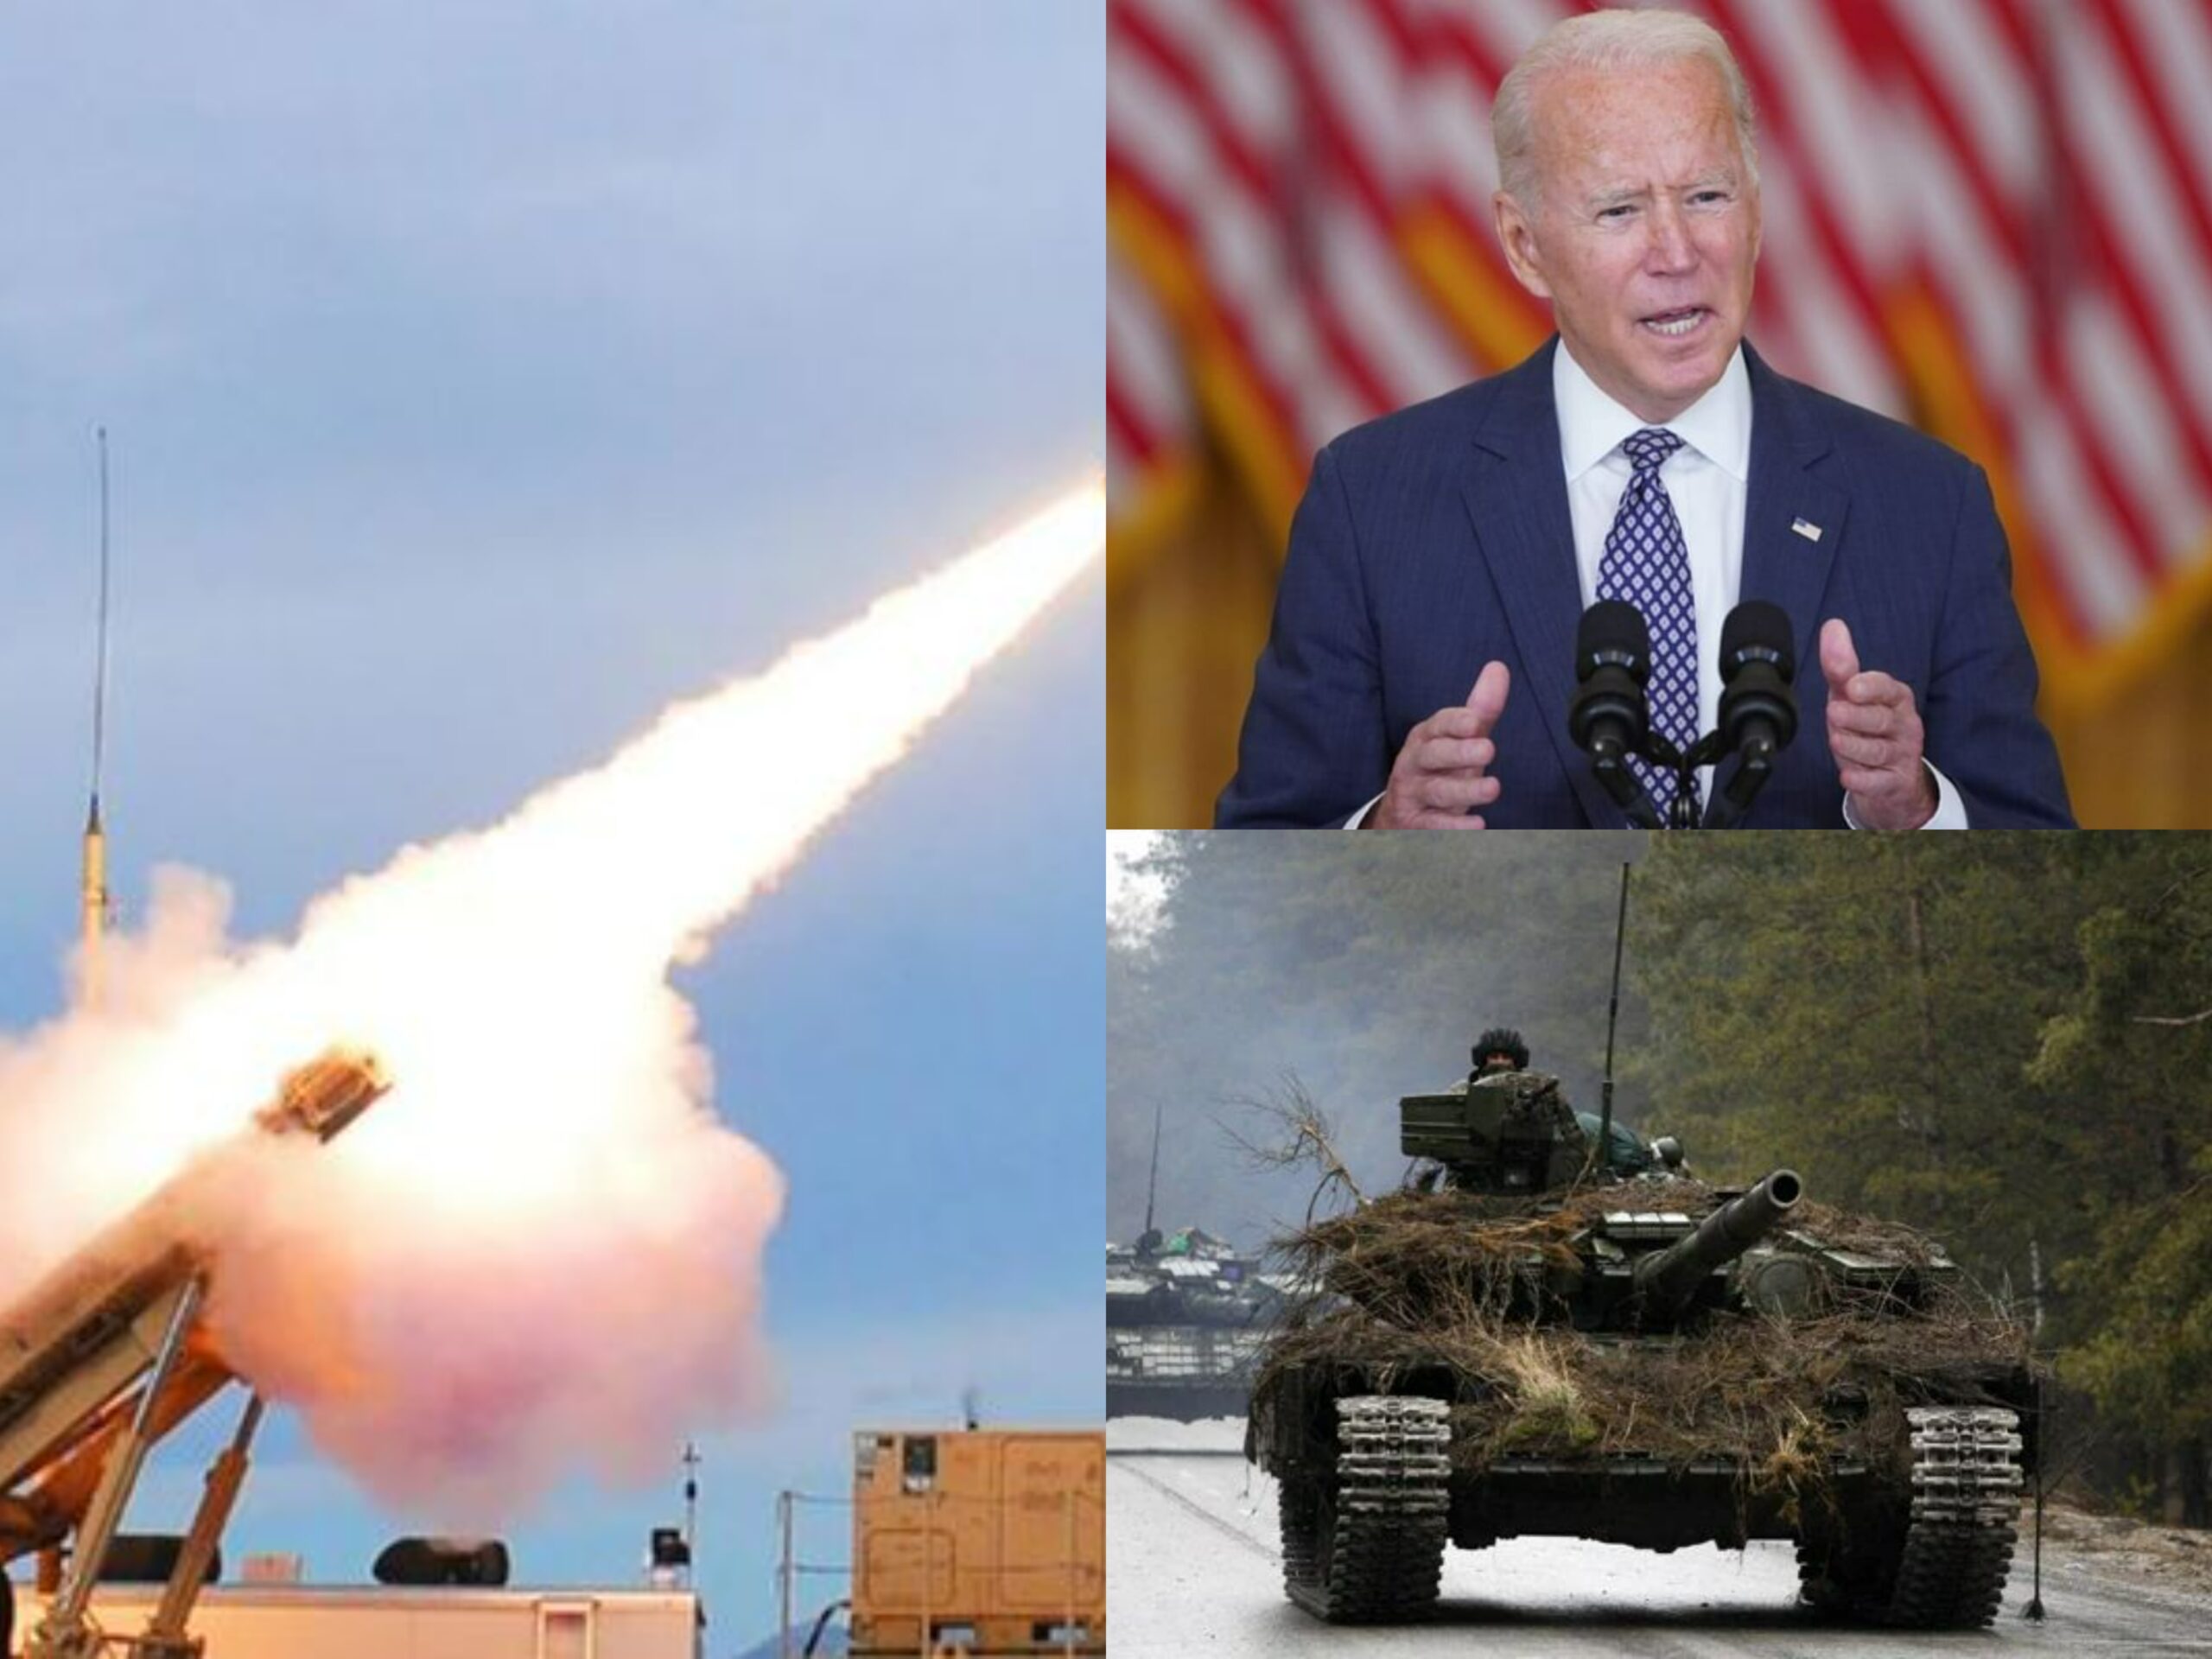 US President Joe Biden announced that he would send 350-million-dollar worth of military weapons to Ukraine to defeat Russia.